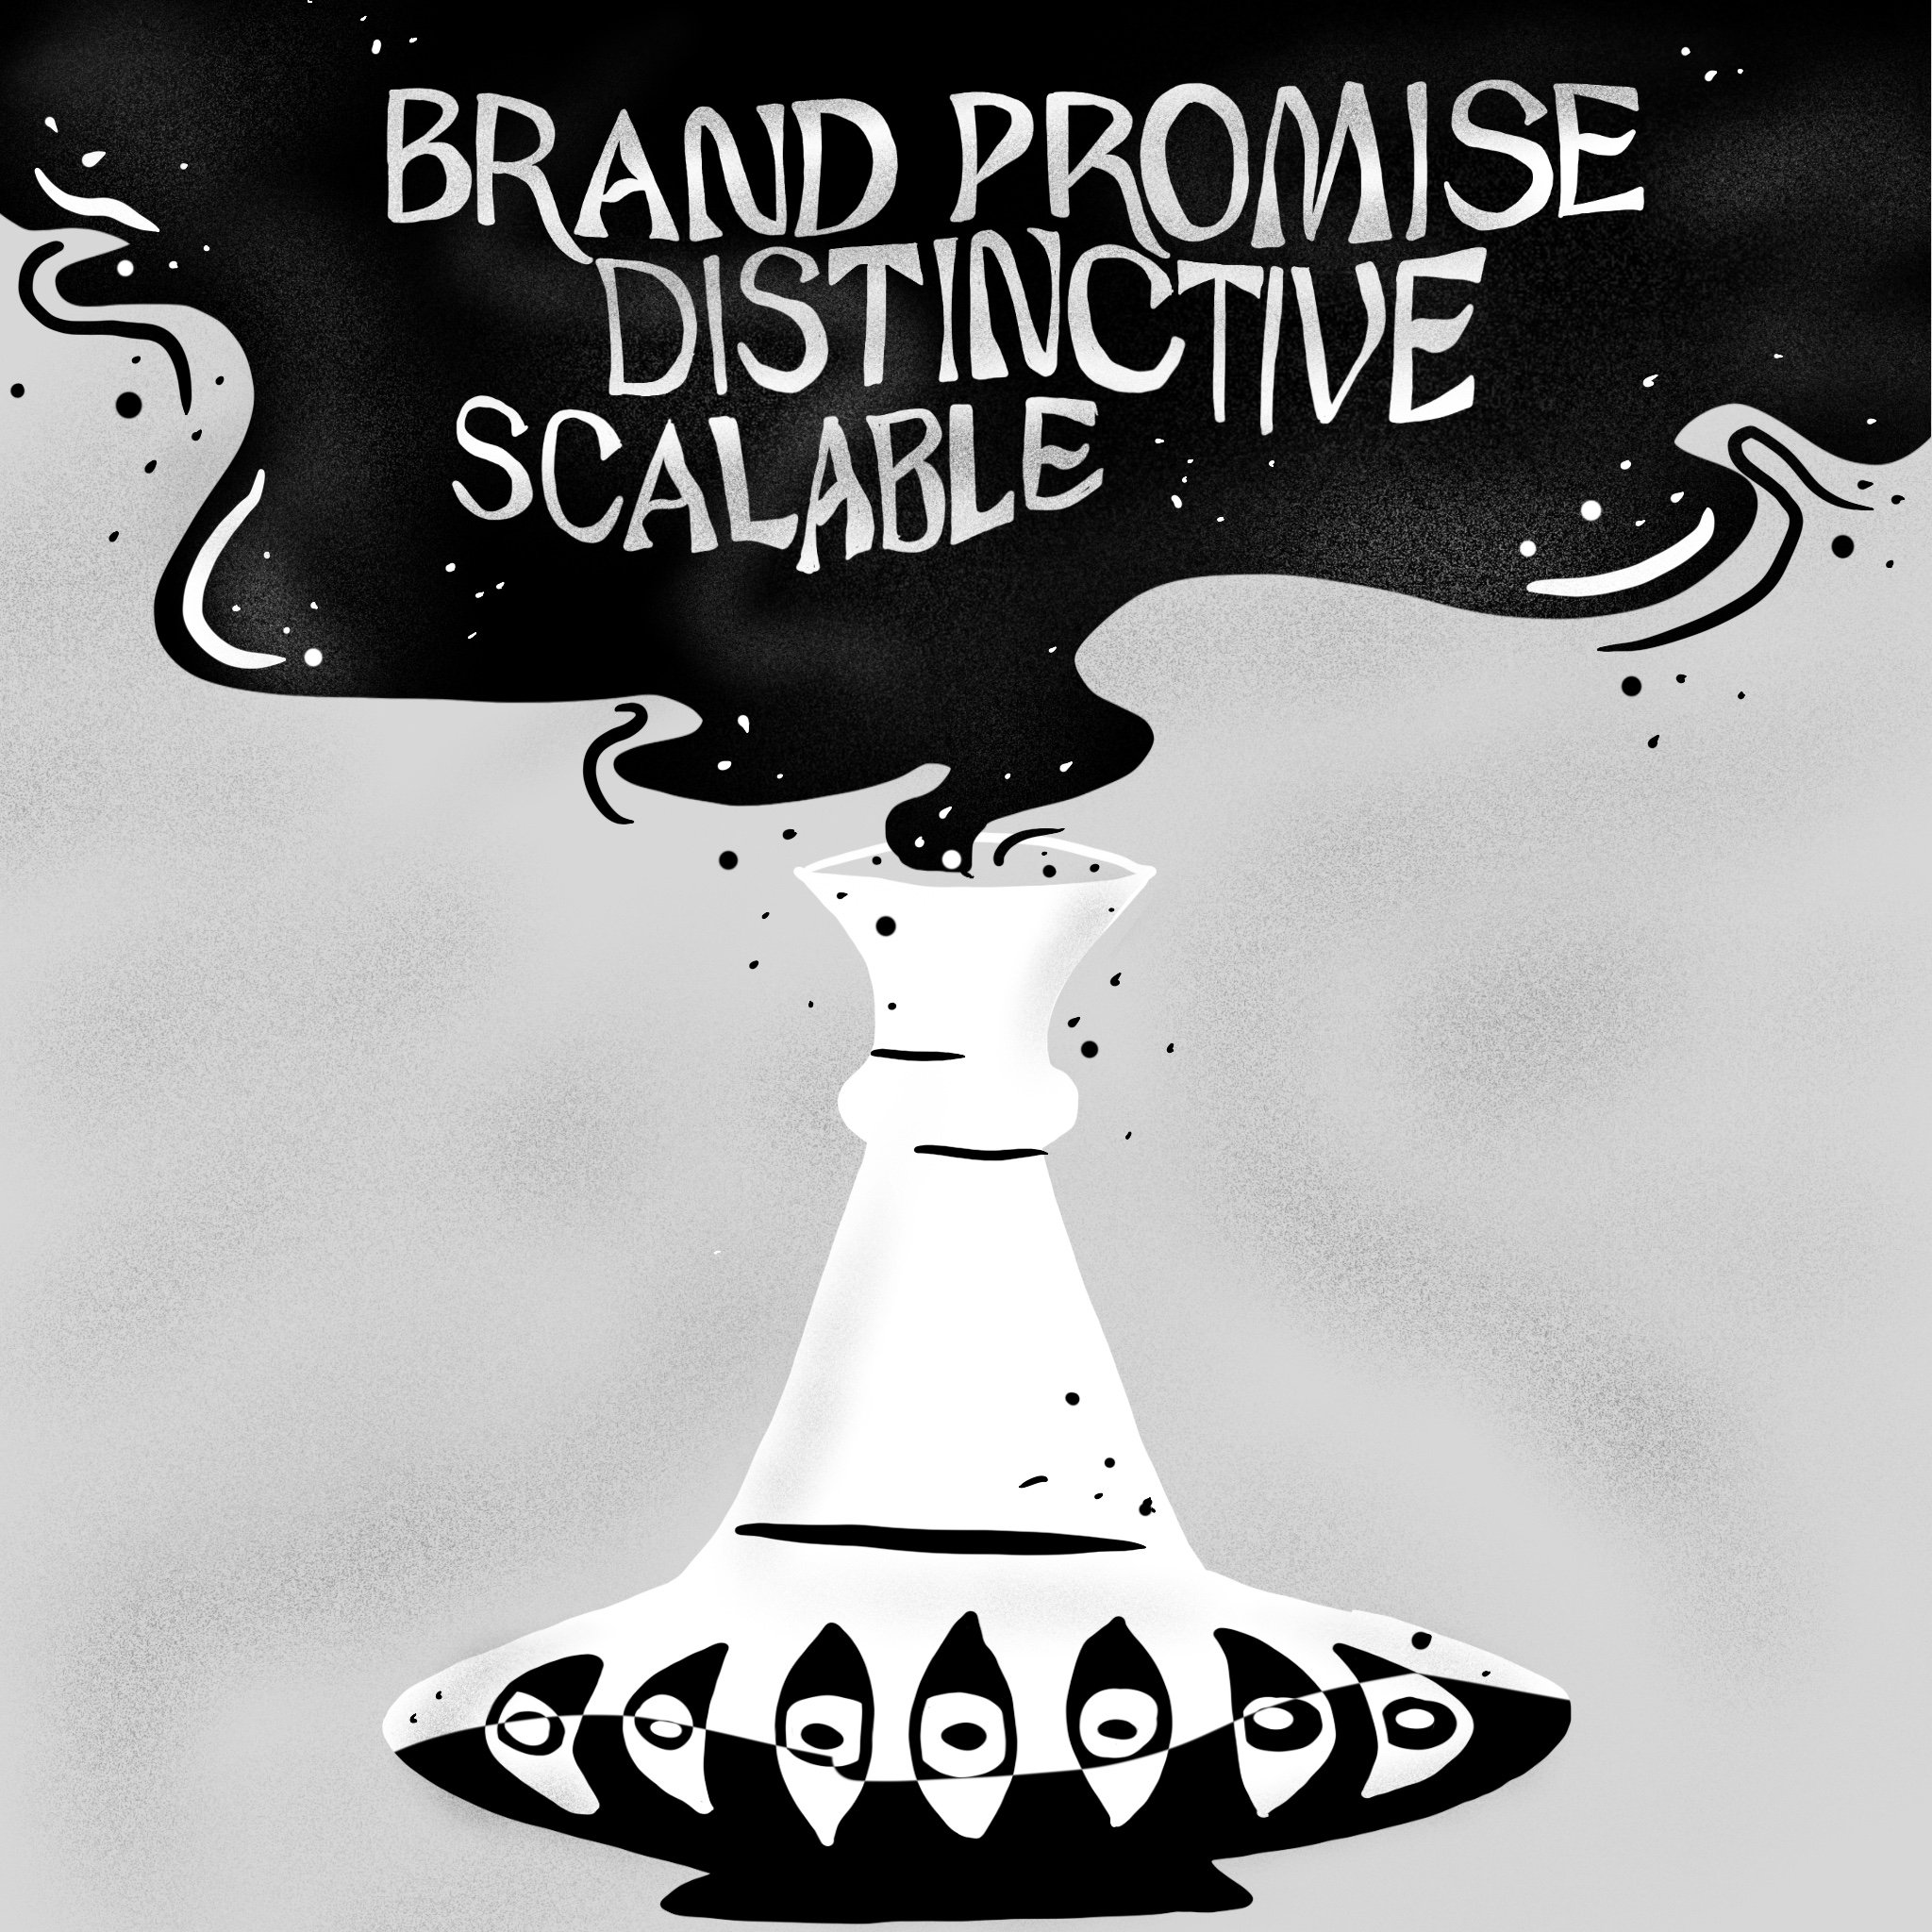 Illustration of a genie bottle with words "Brand Promise, Scalable & Distinctiv